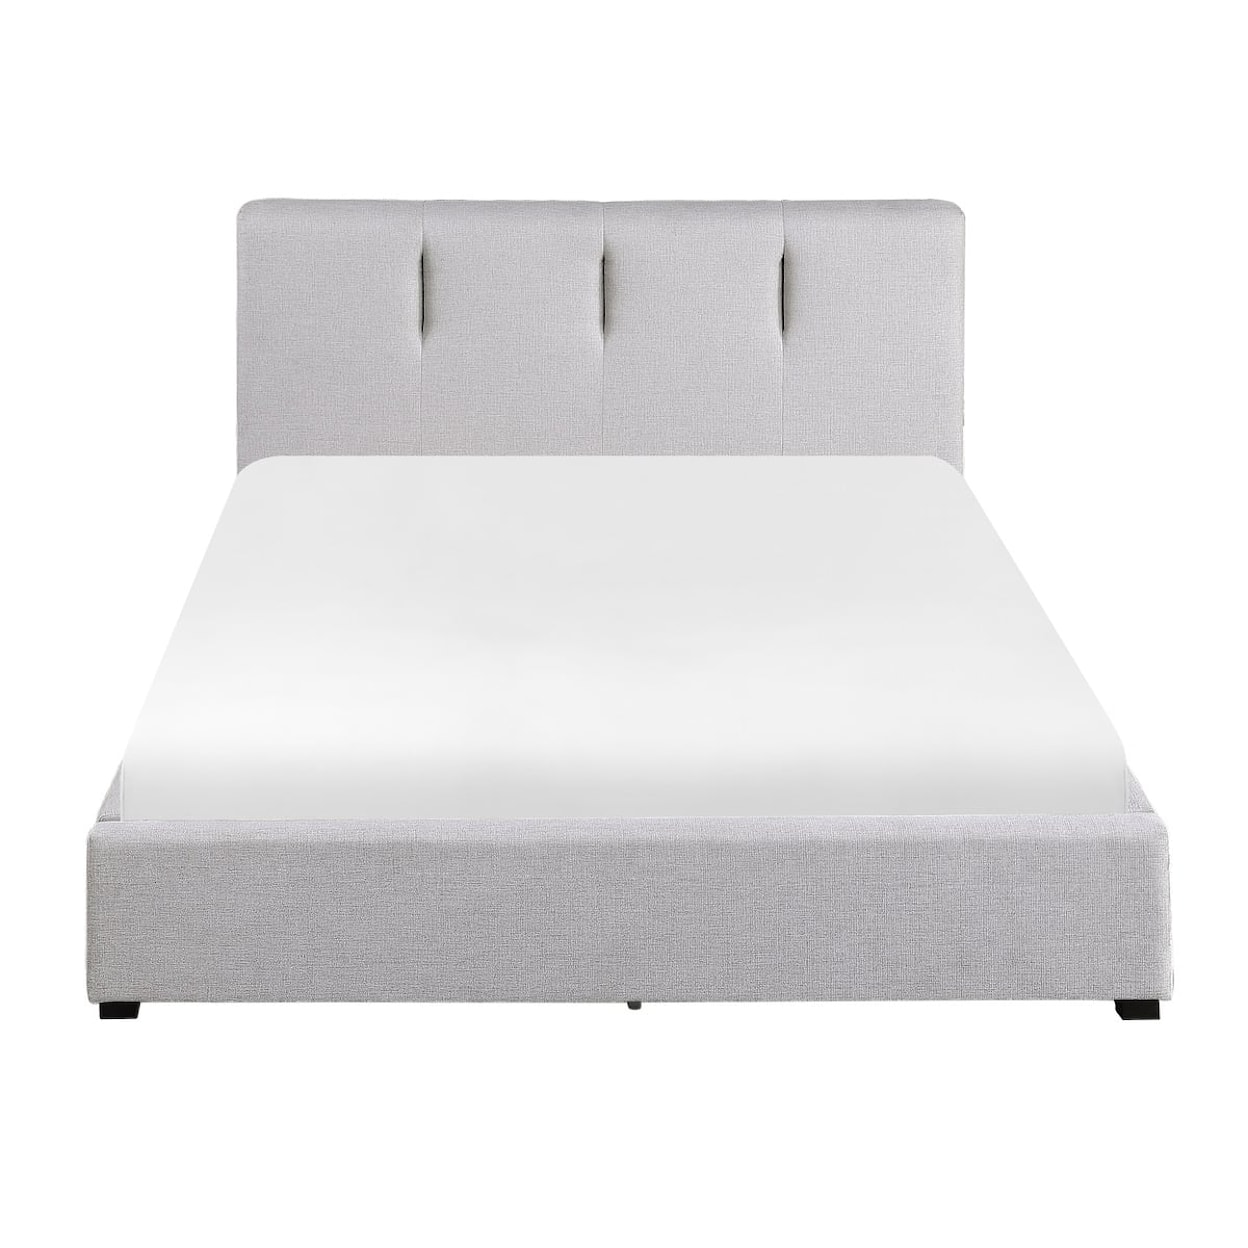 Homelegance Aitana Queen Bed with Footboard Storage